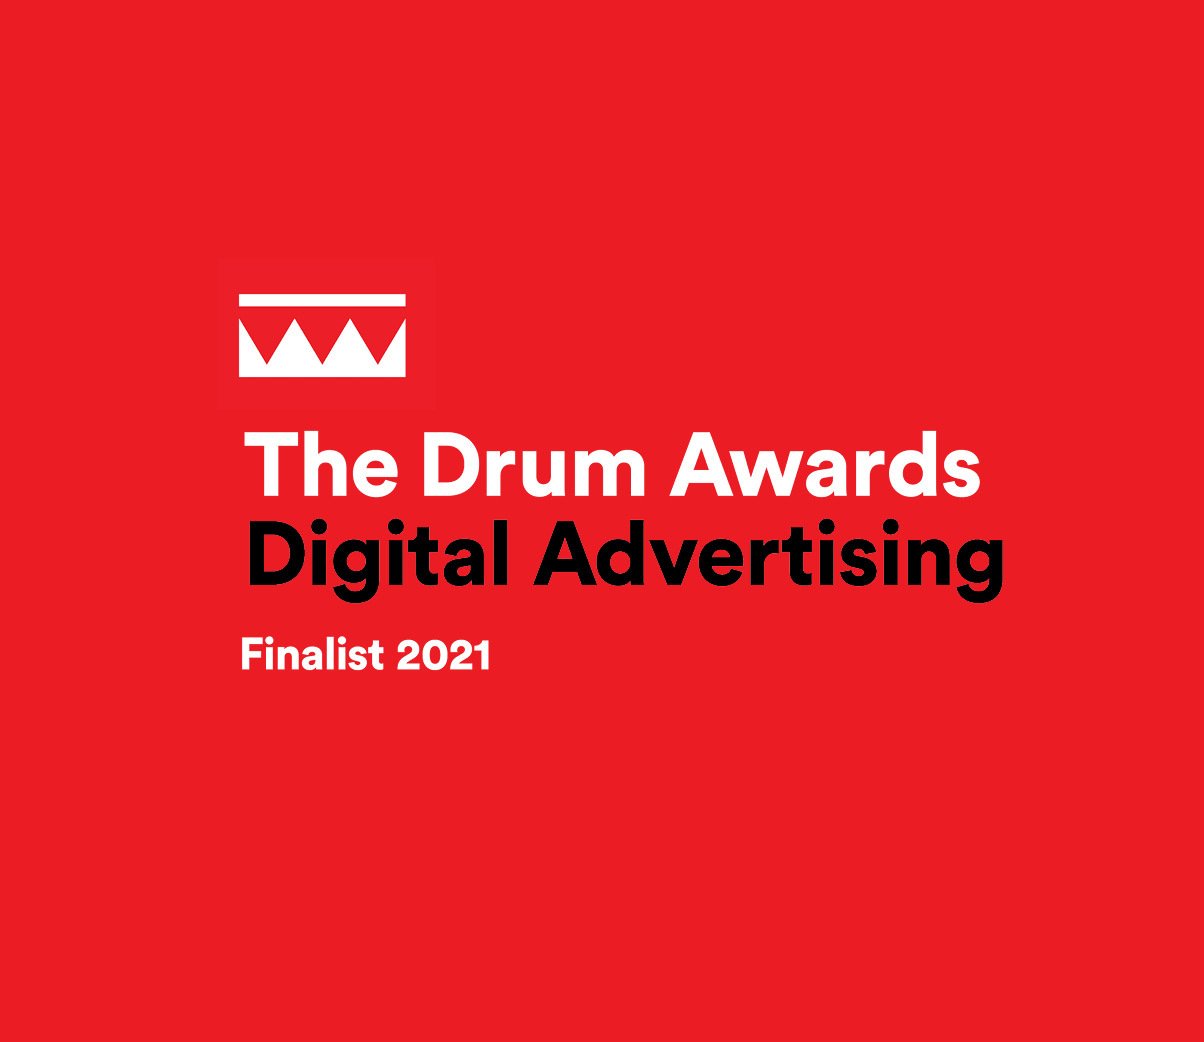 Captify is nominated for three categories at The Drum Digital Advertising Awards